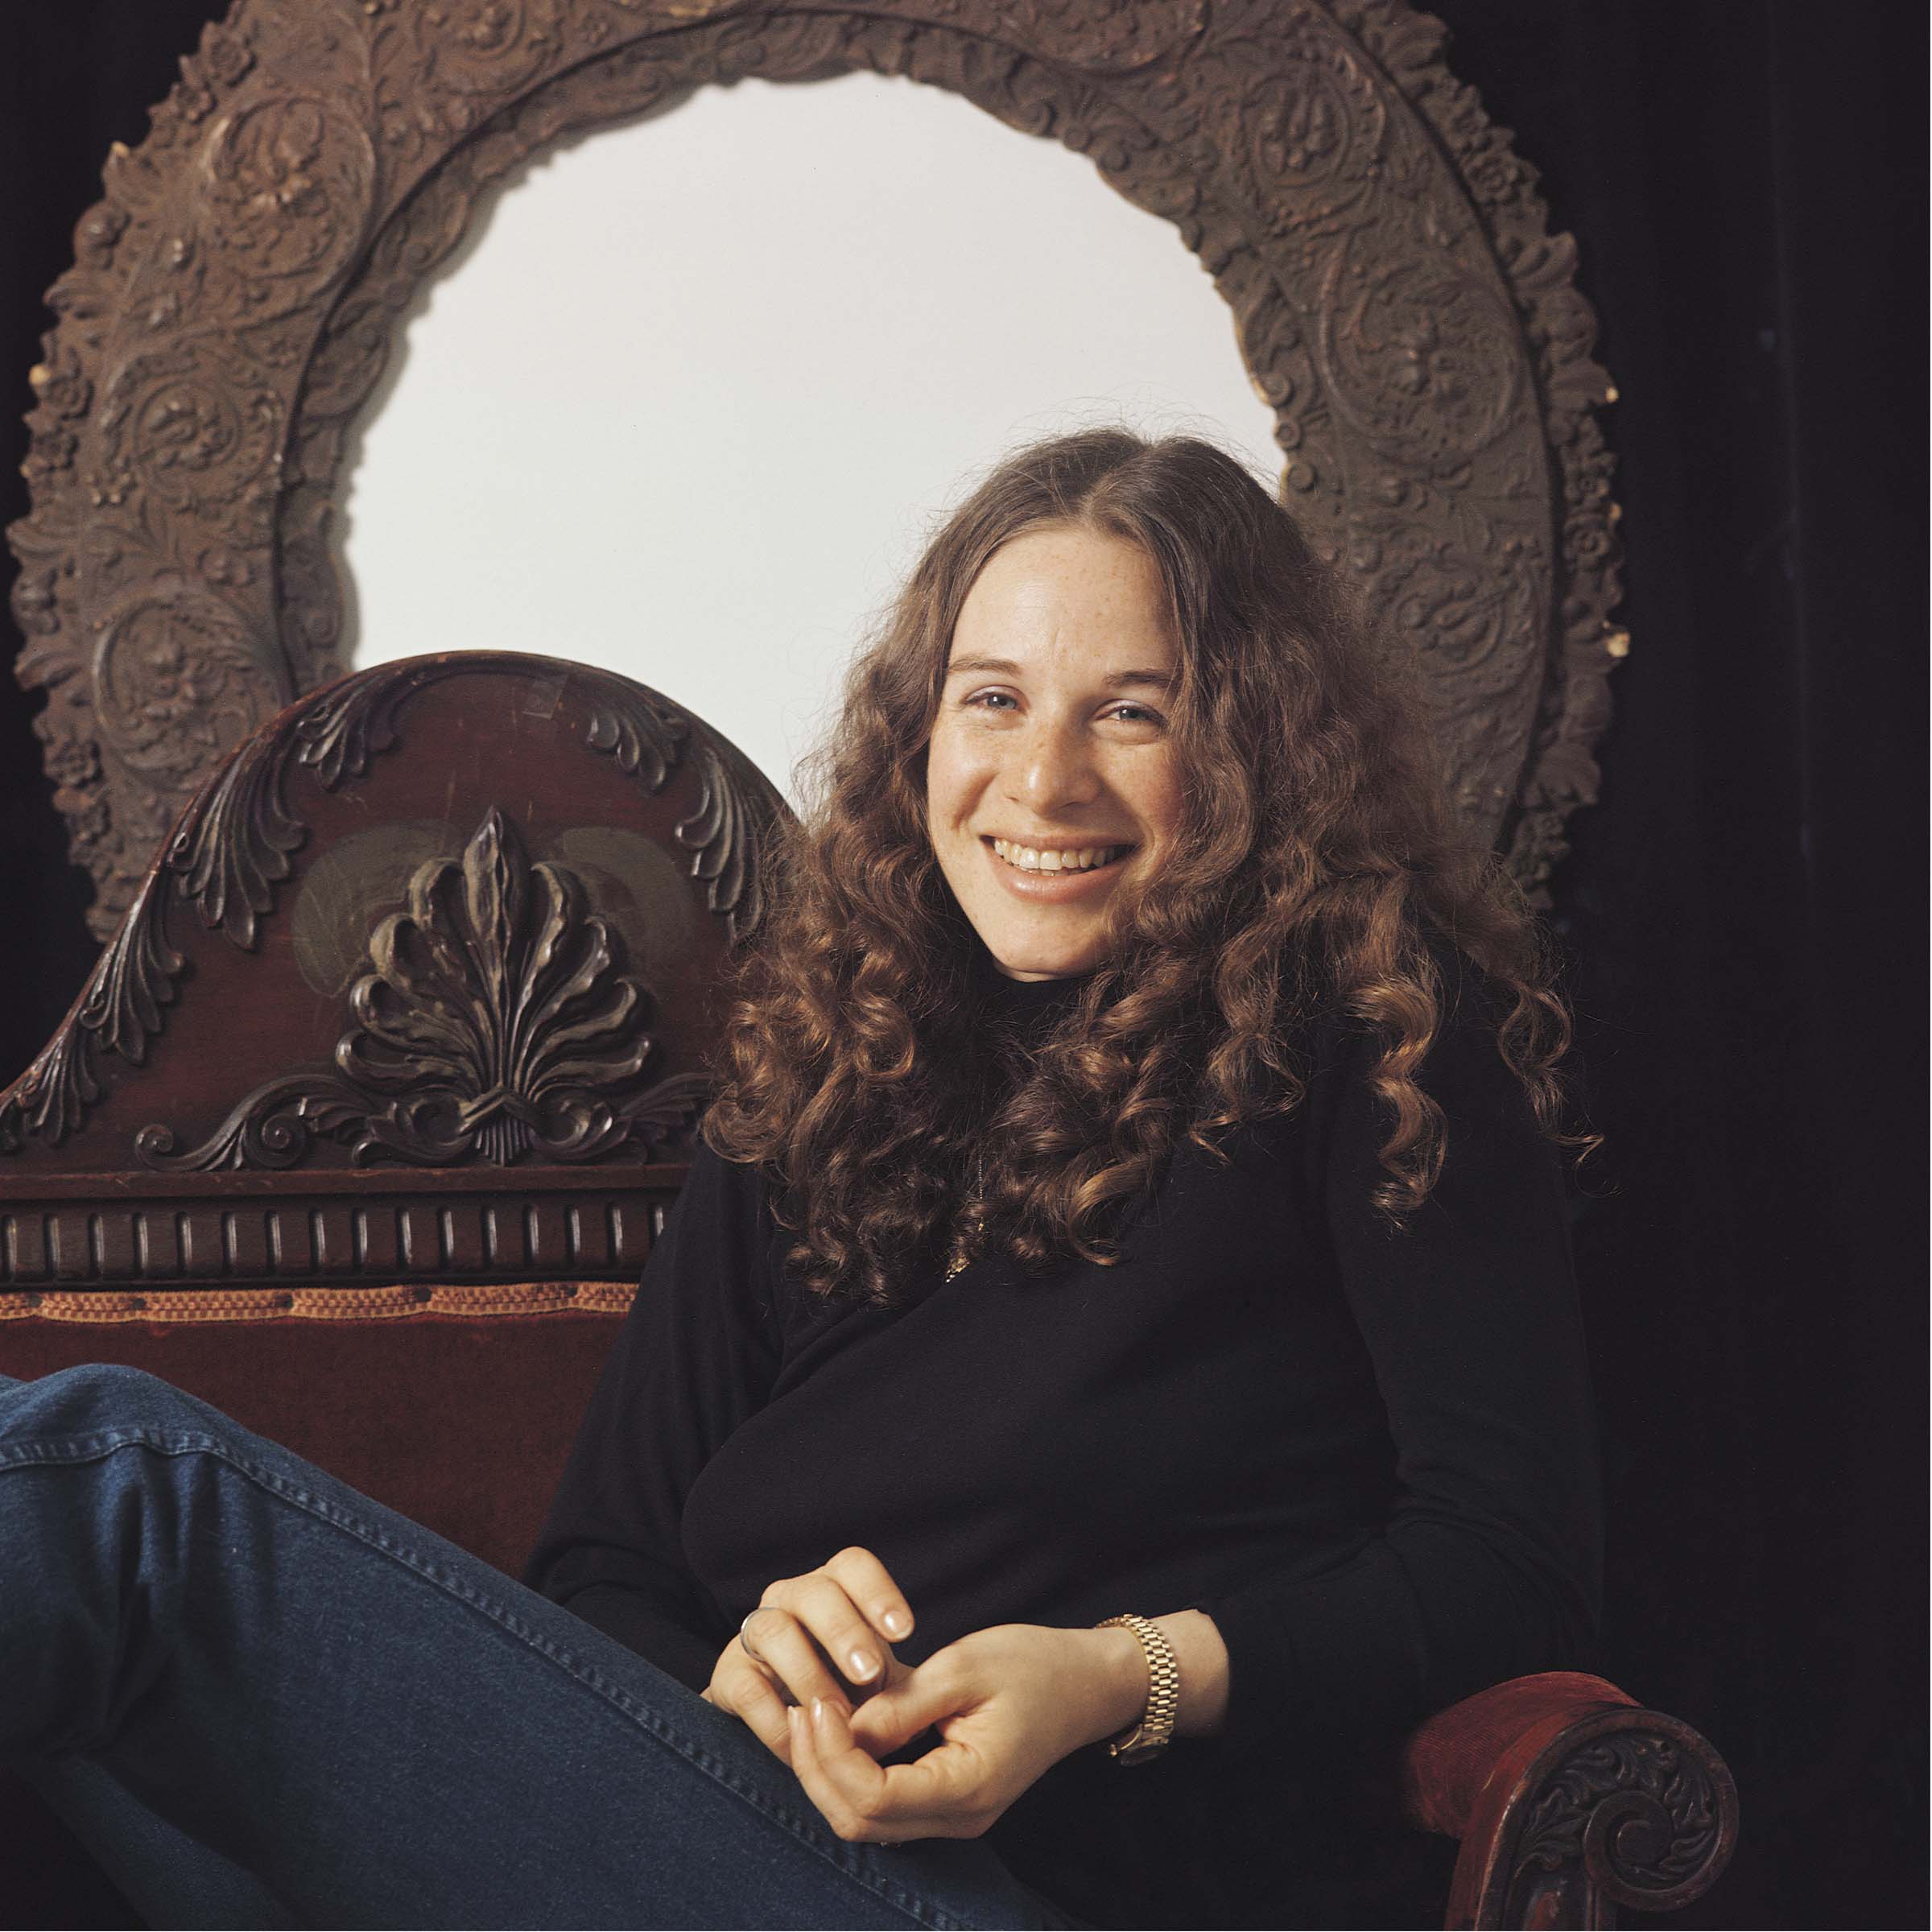 Portrait of Carole King, 1972 | Source: Getty Images